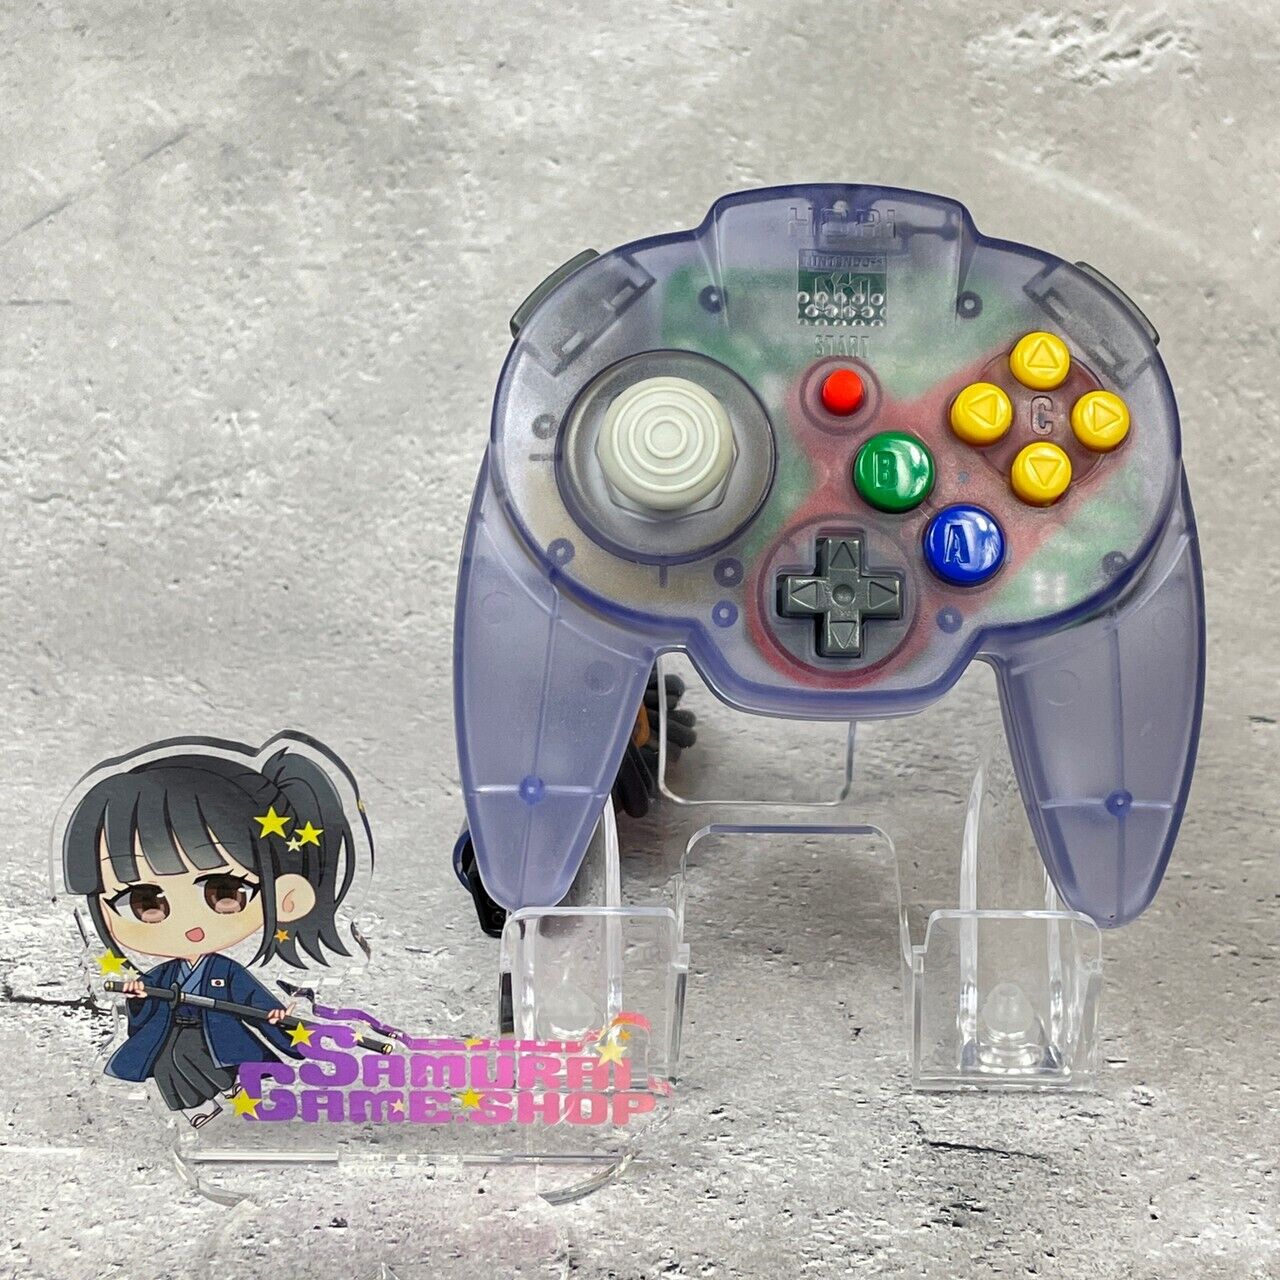 N64 Hori Pad Mini Controller For Nintendo 64 Japanese Game Choose Your Color 9